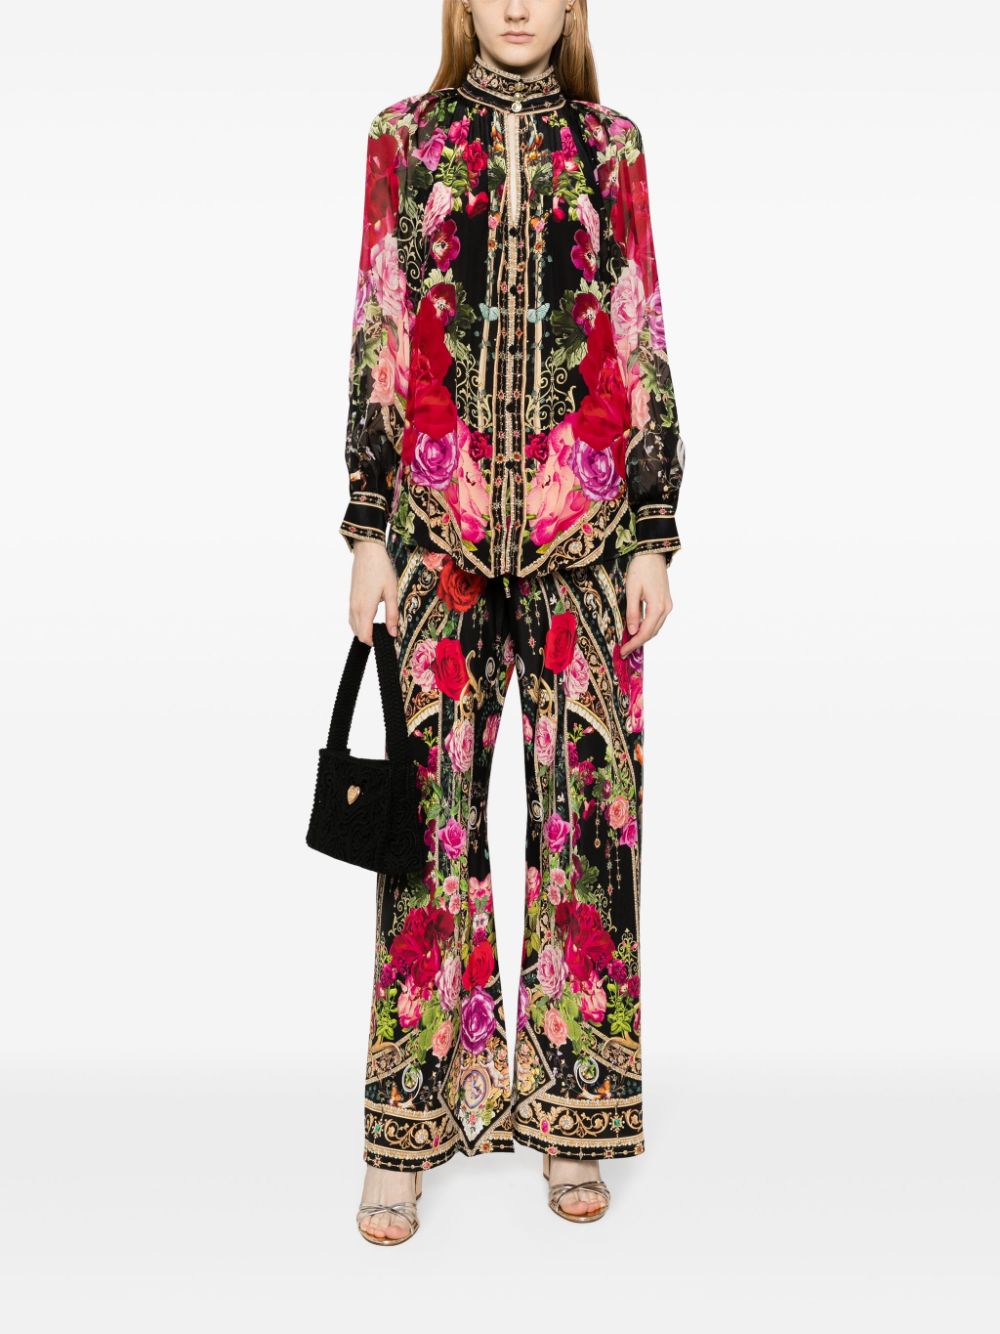 Camilla Reservation For Love Silk Trousers - Farfetch